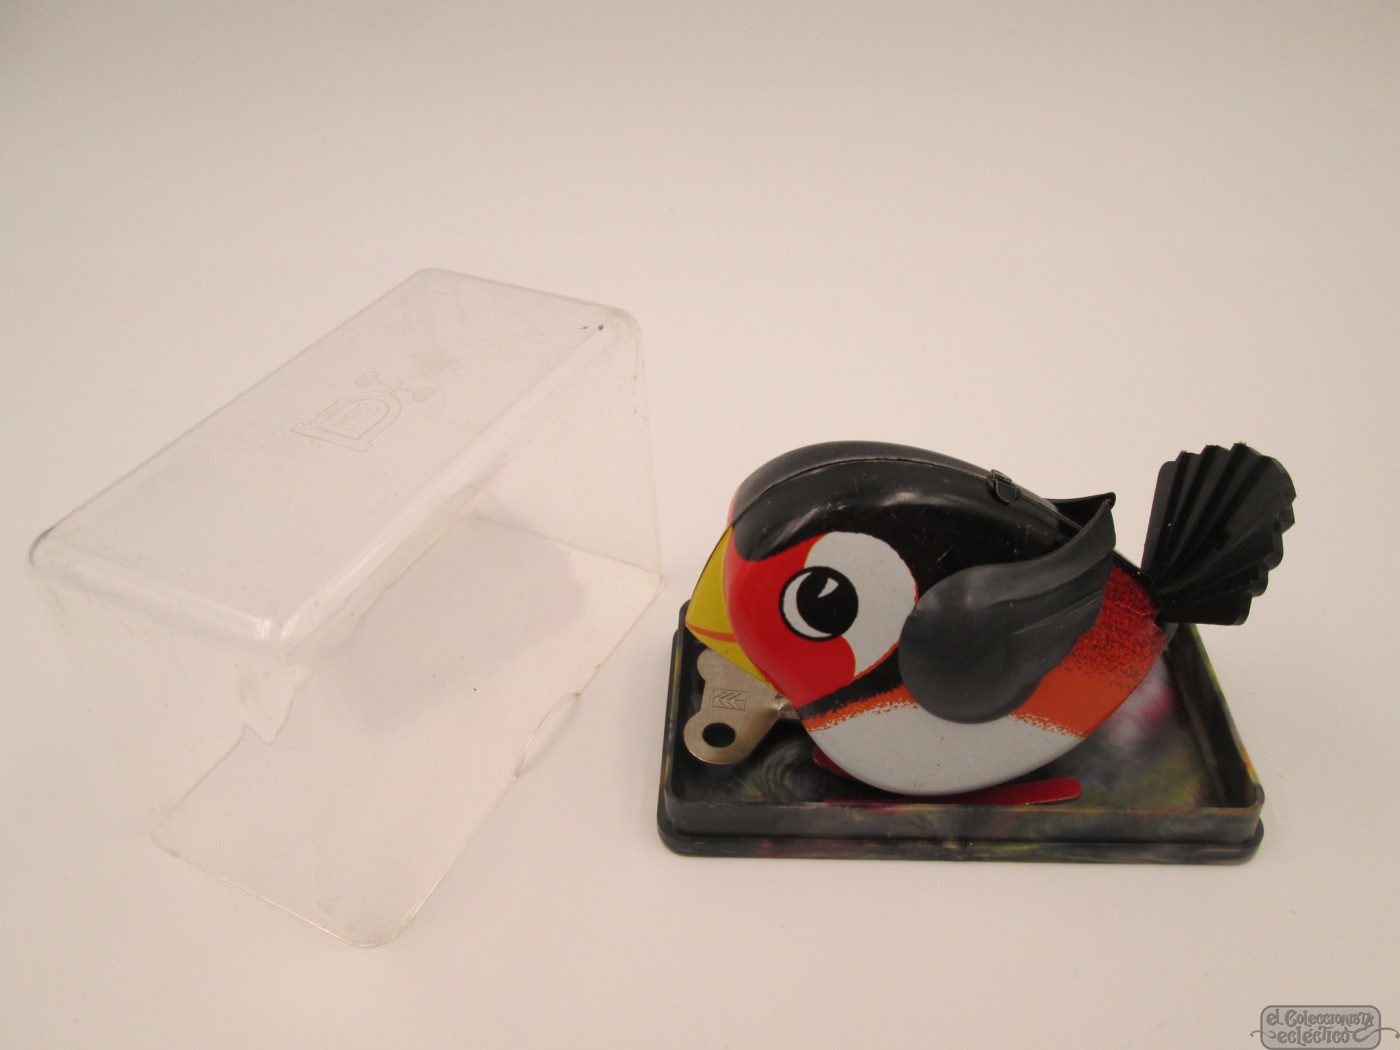 Details about   Lehmann Germany Wind Up Tin Toy Luli Pecking Bird Litho 1960s Key Box Works 943 